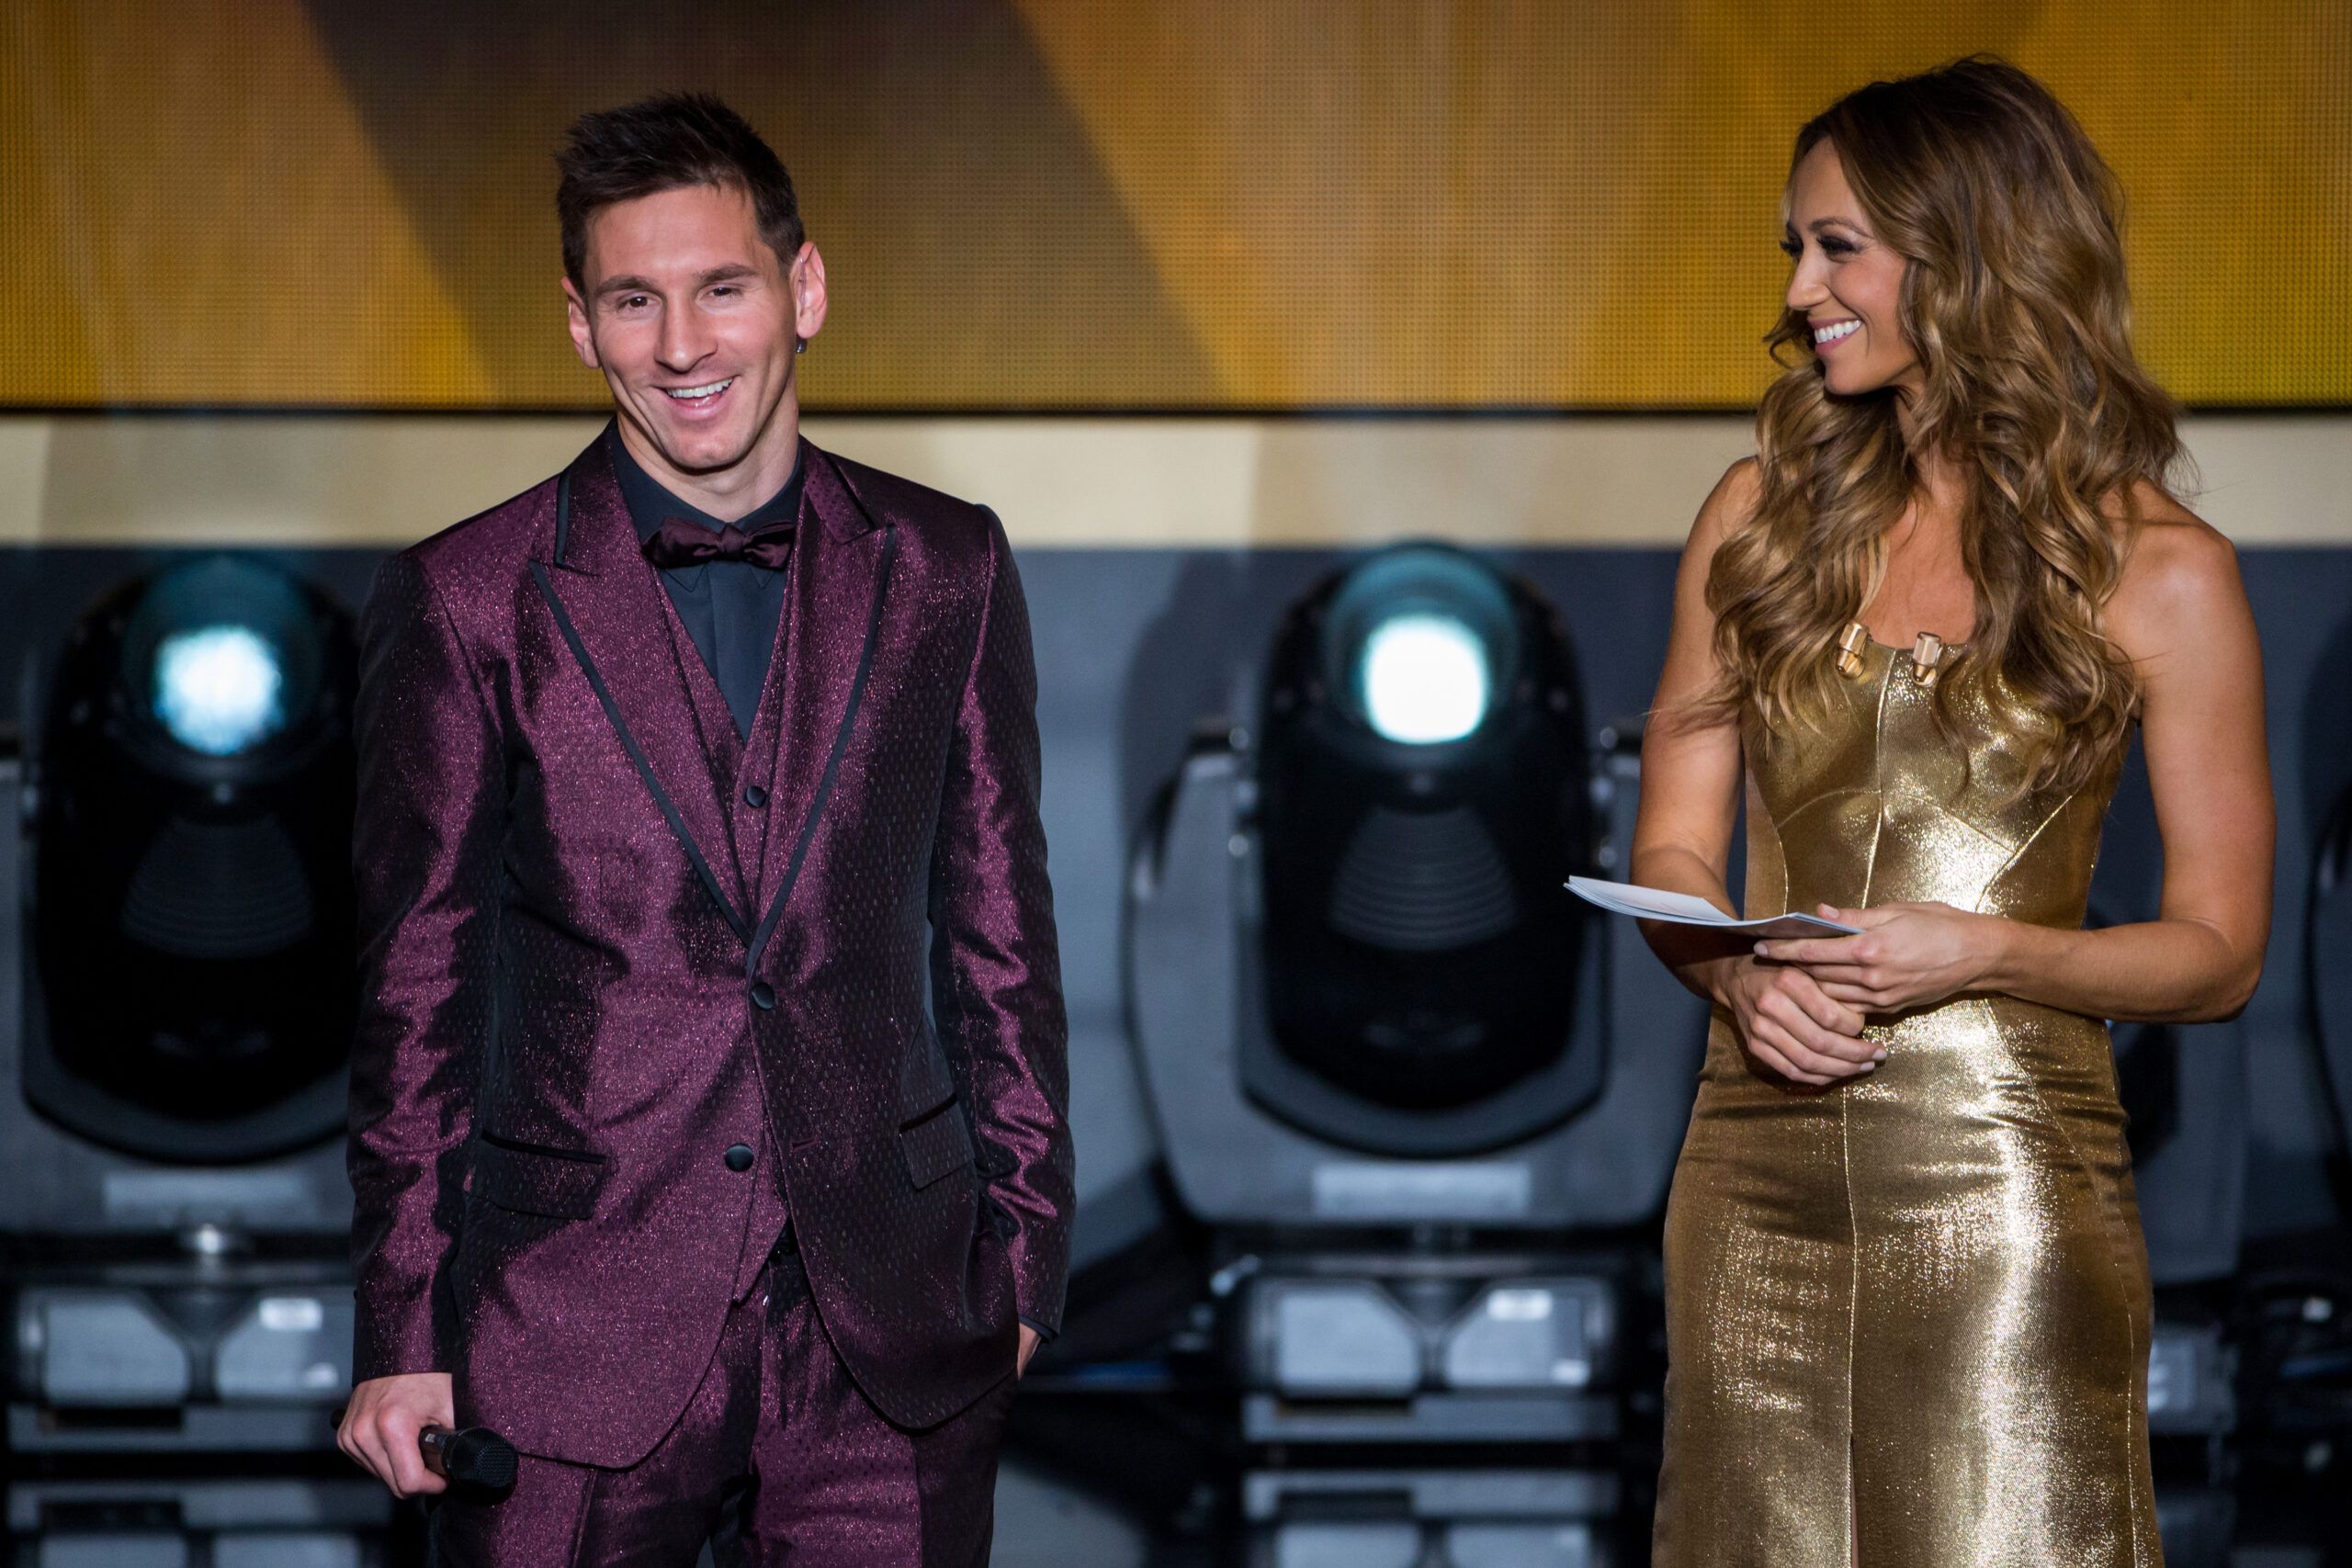 Kate Abdo with Lionel Messi at Ballon d'Or ceremony